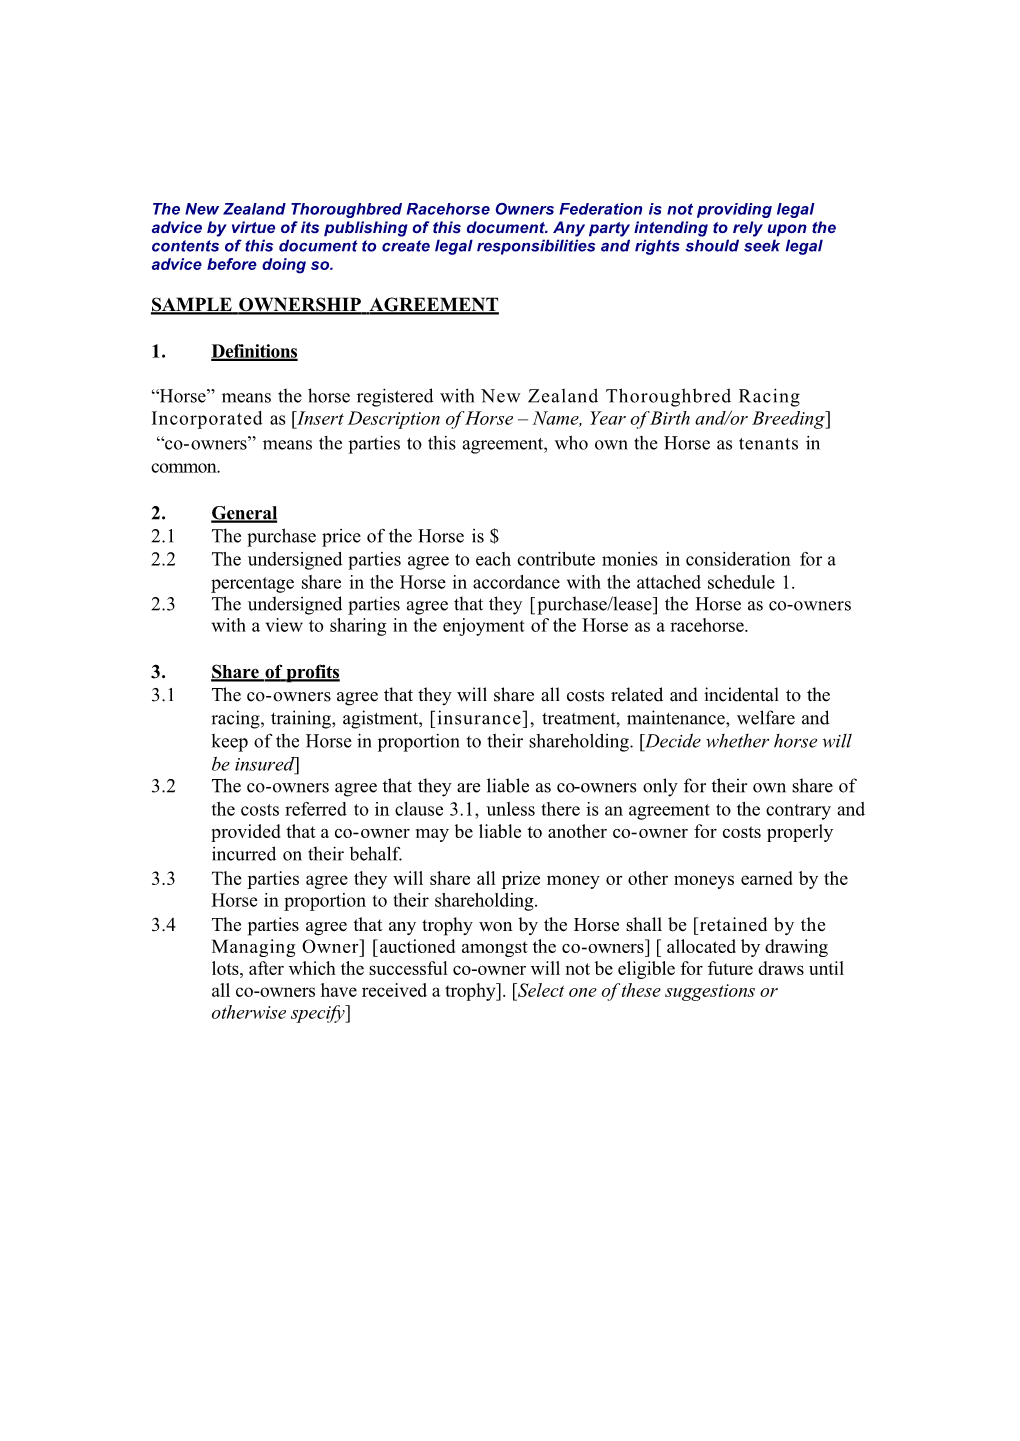 Owner's Agreement Final